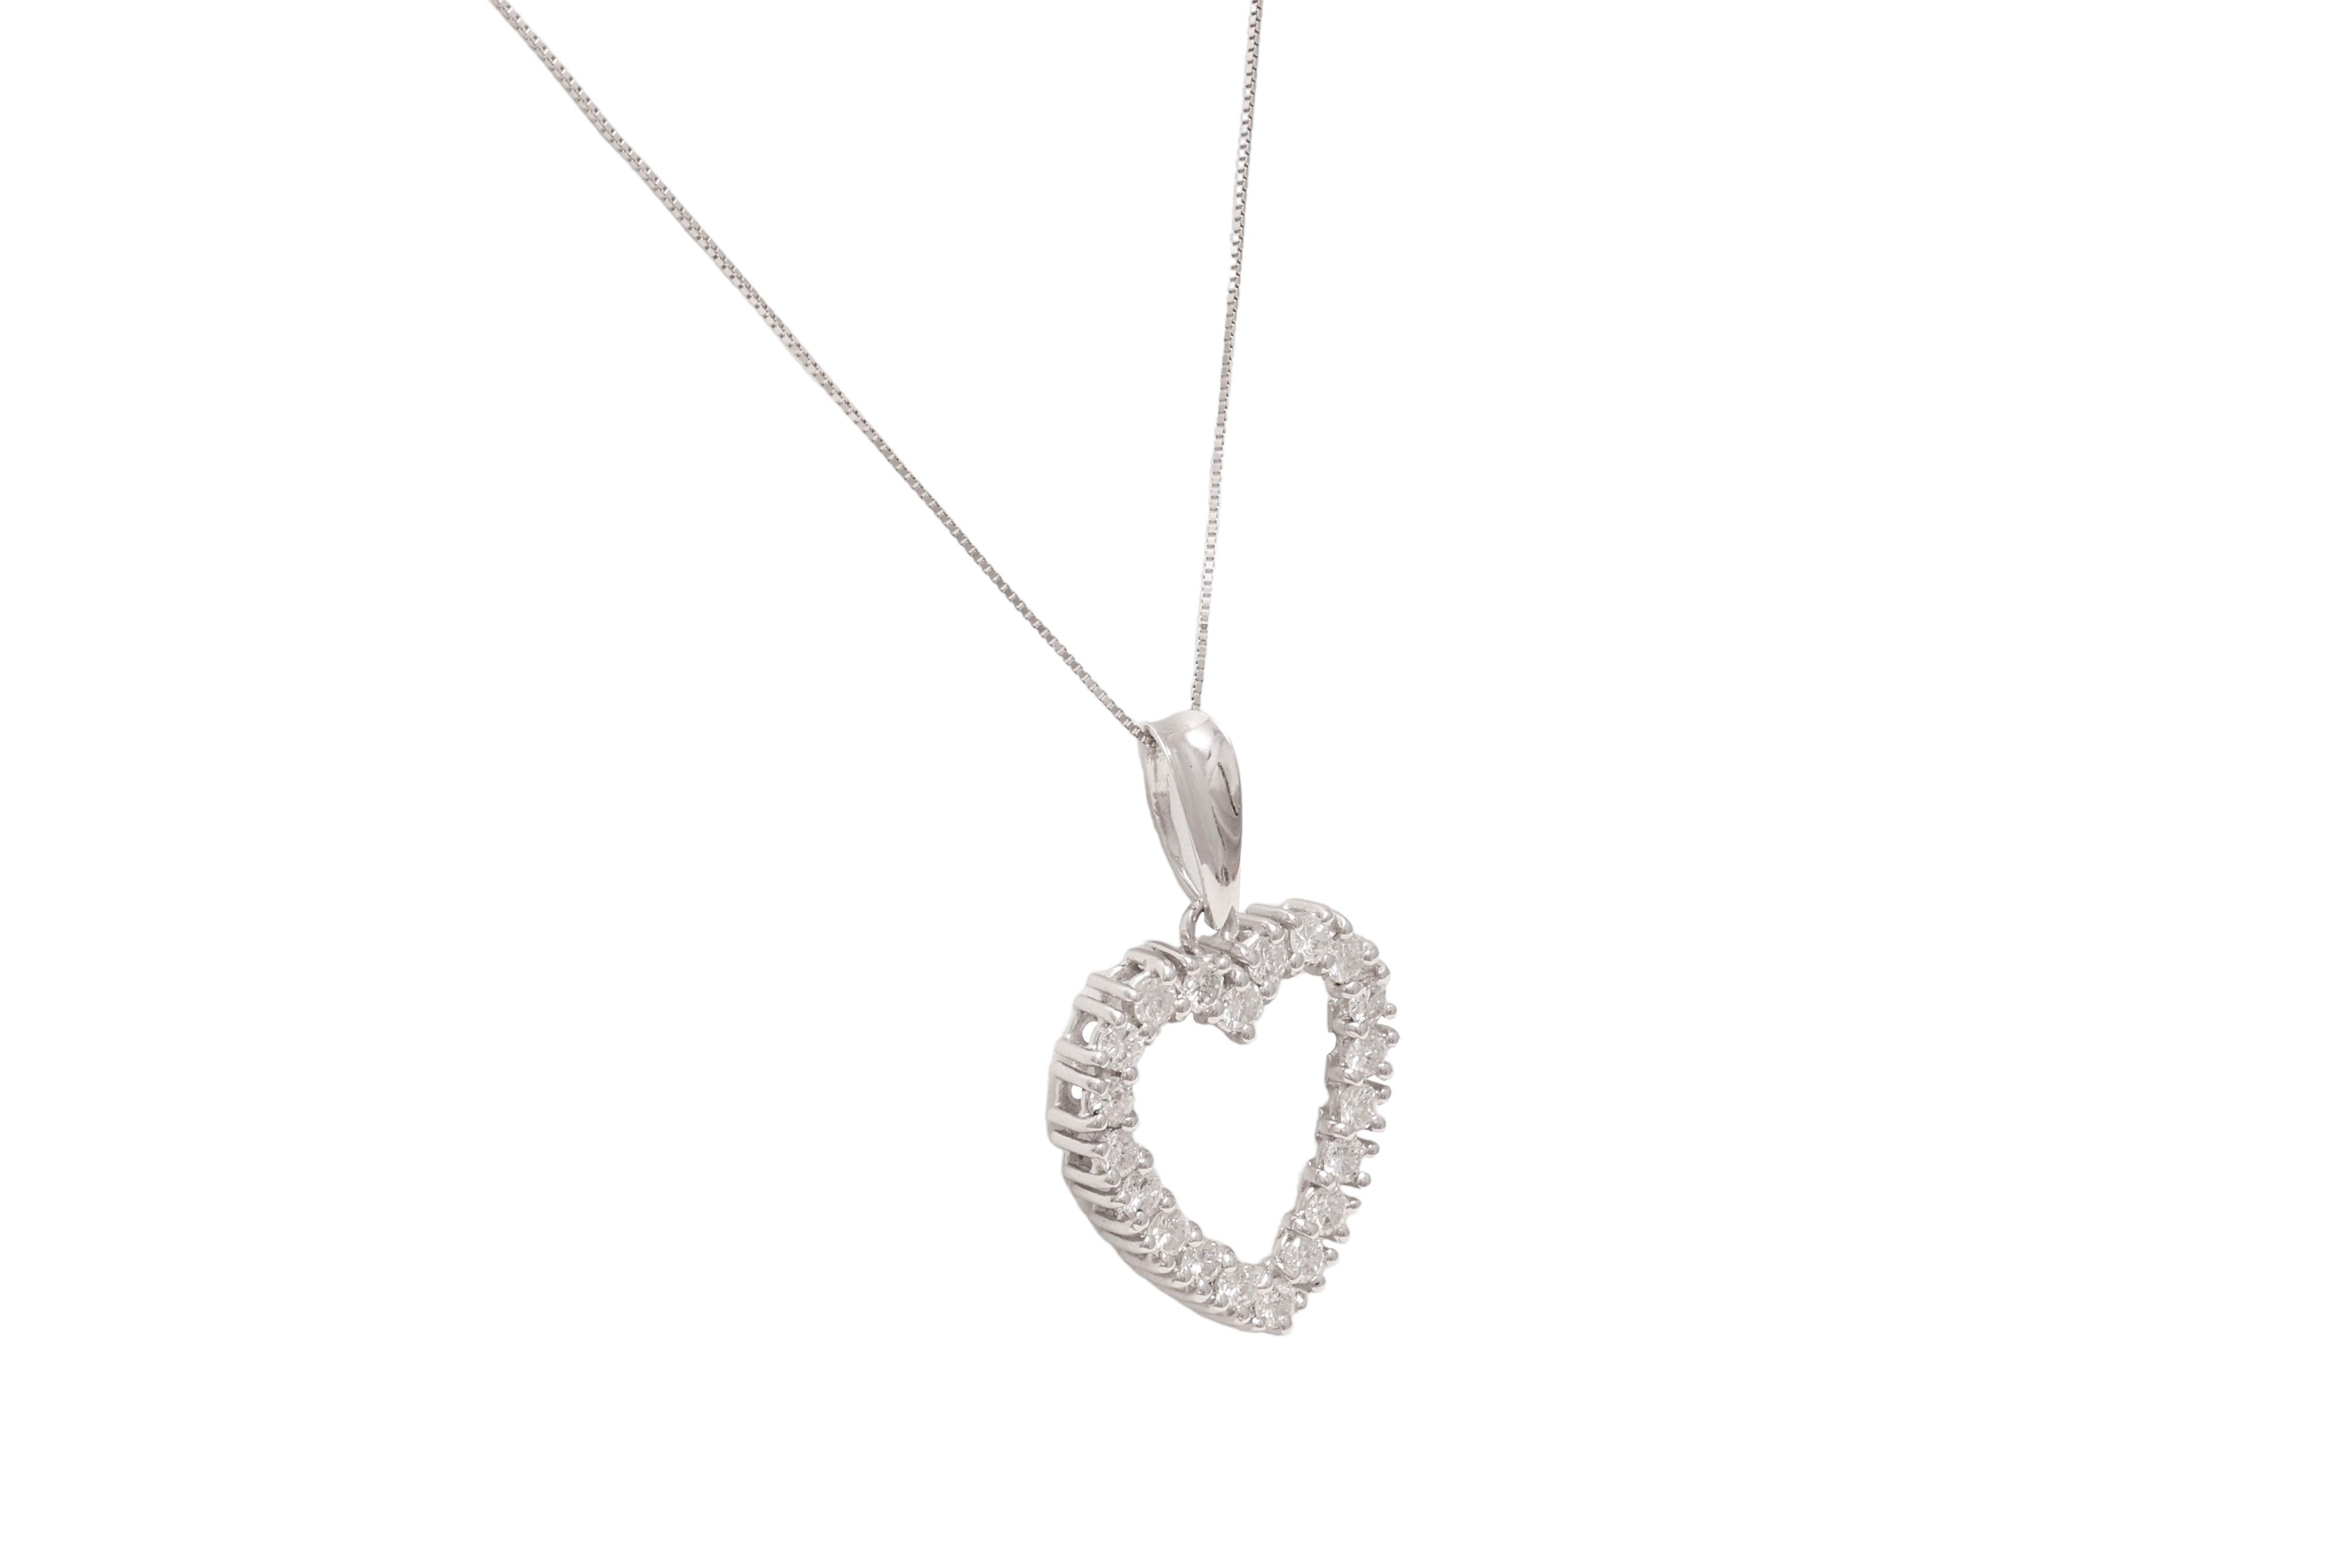 Stunning 18 kt. White Gold Heart Pendant Necklace with 0.80 ct. Diamonds

Diamonds: brilliant cut diamonds, together 0.80 ct.

Material: 18 kt. white gold

Measurements pendant: 18 mm x 30 mm x 3.2 mm
Measurements necklace: 40 cm

Total weight: 3.7